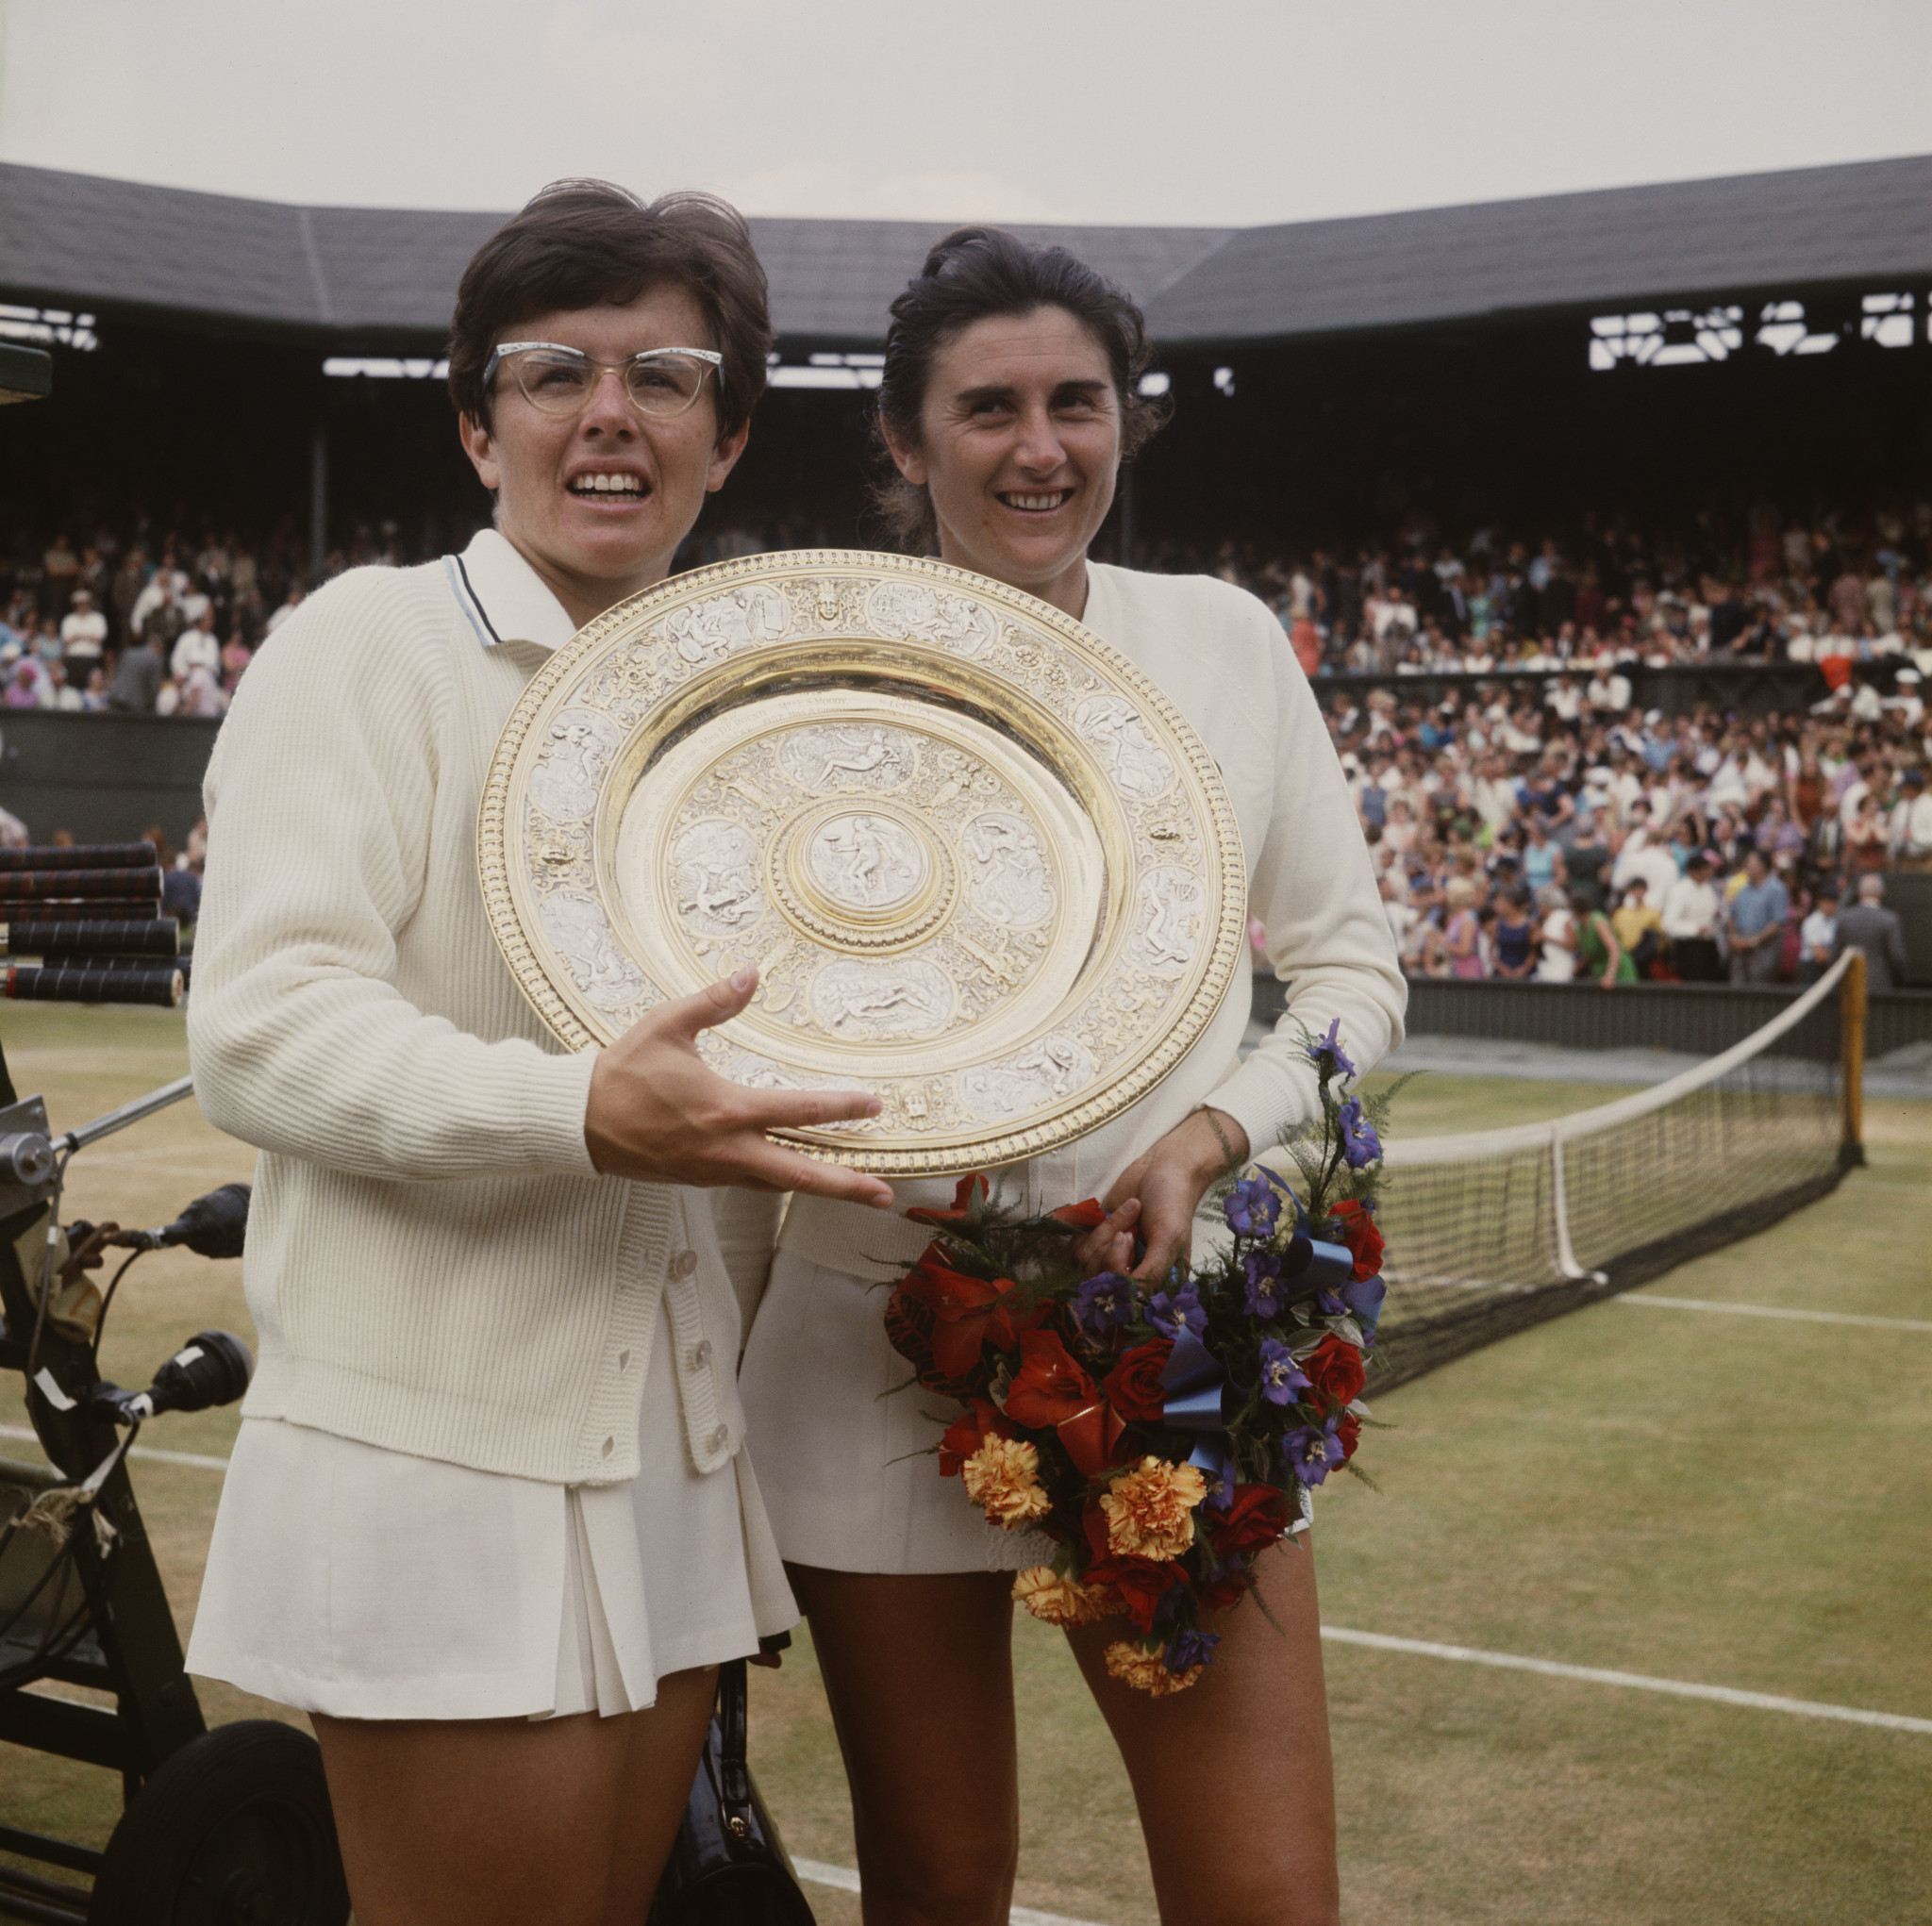 Billie Jean King won the first women's final of the open era at the 1968 Wimbledon Championships, beating Australia's Judy Tegart 9-7, 7-5 in the final ©Getty Images